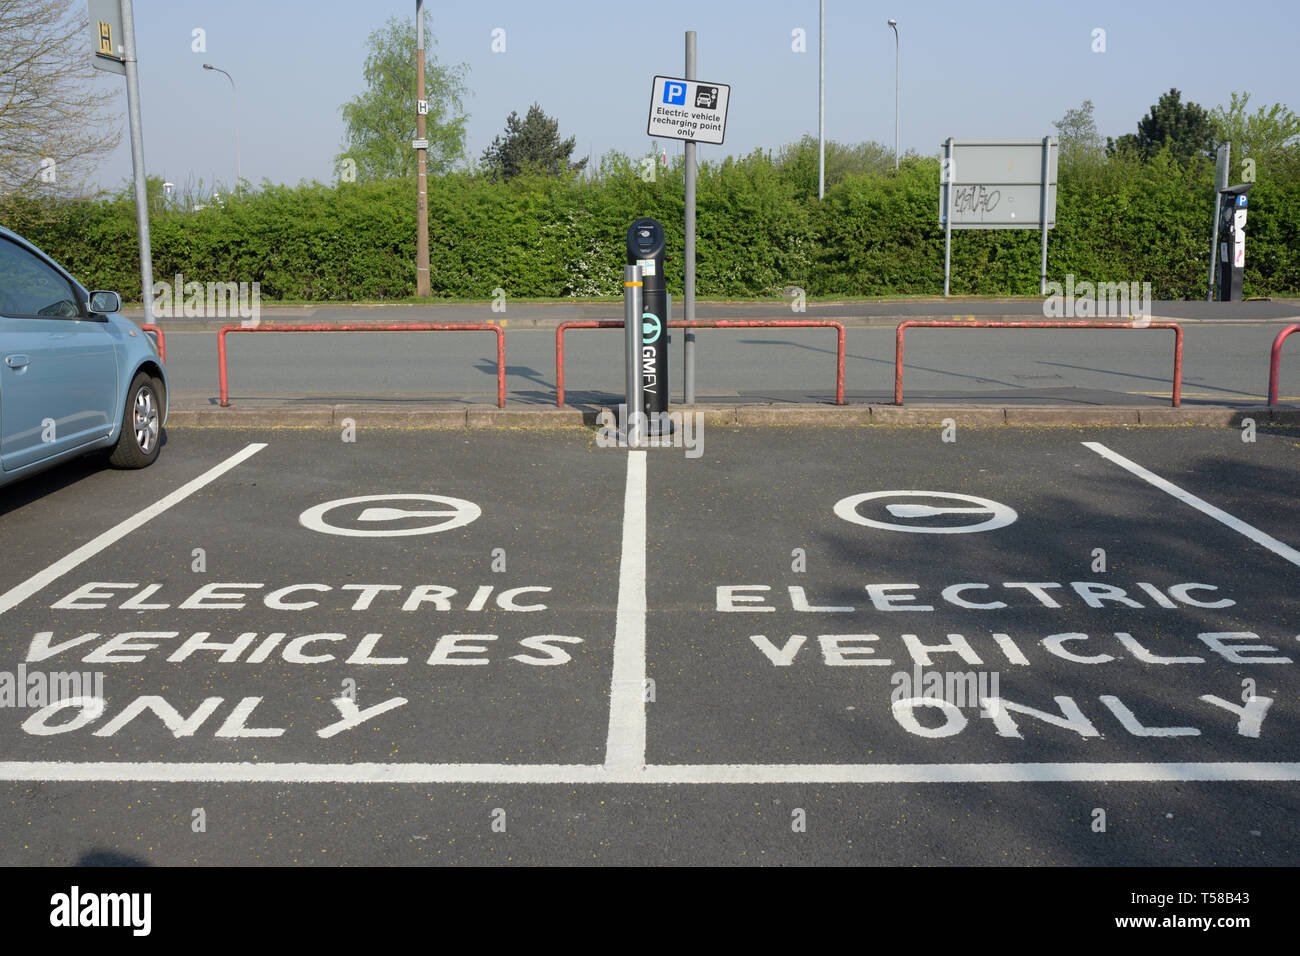 Electric vehicles only surface marking, two empty parking bays and electric vehicle recharging point and pole mounted sign in Bury Lancashire uk Stock Photo